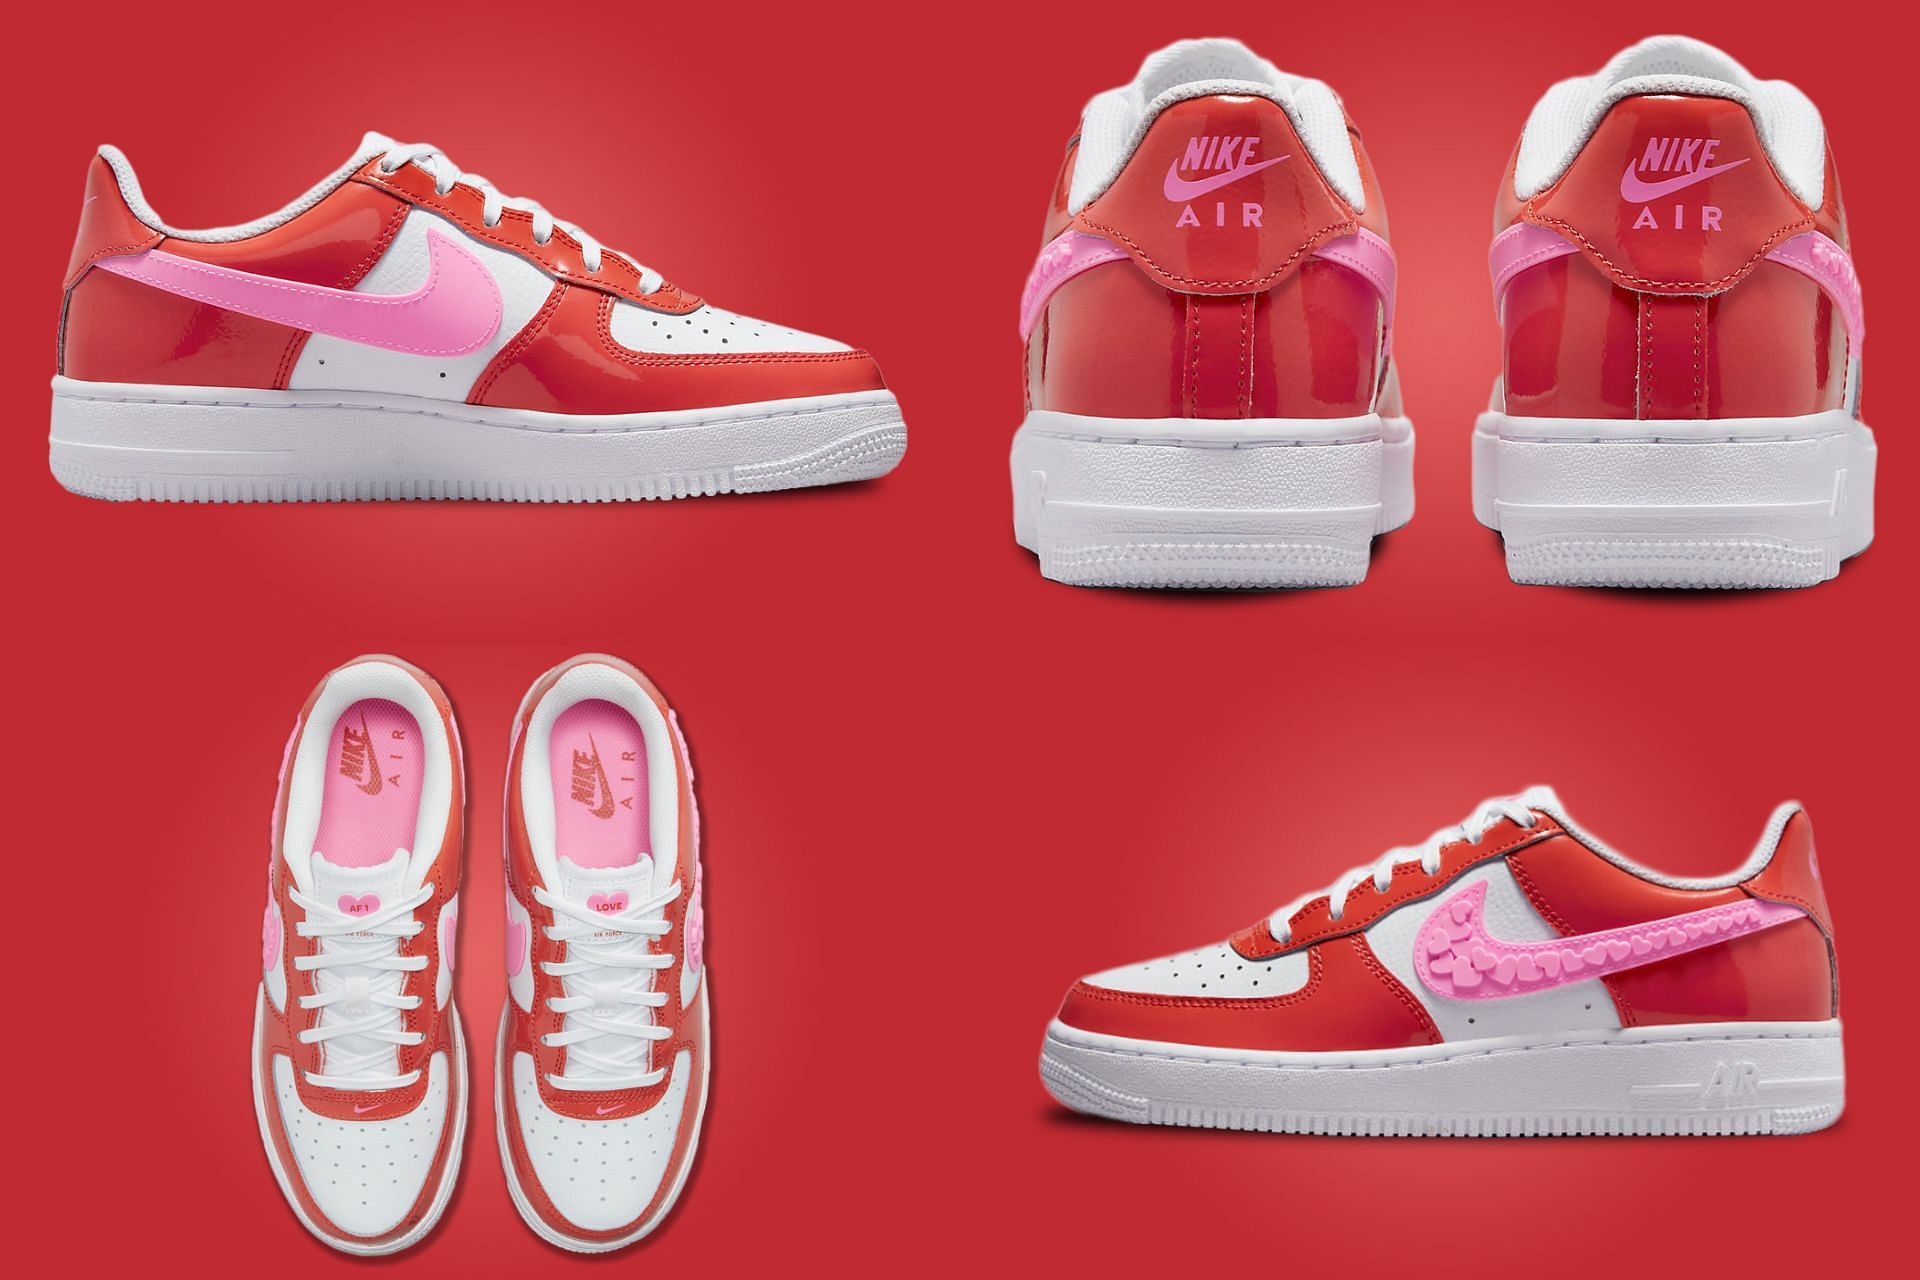 Where to buy Nike Air Force 1 Valentine's Day sneakers? Price, release